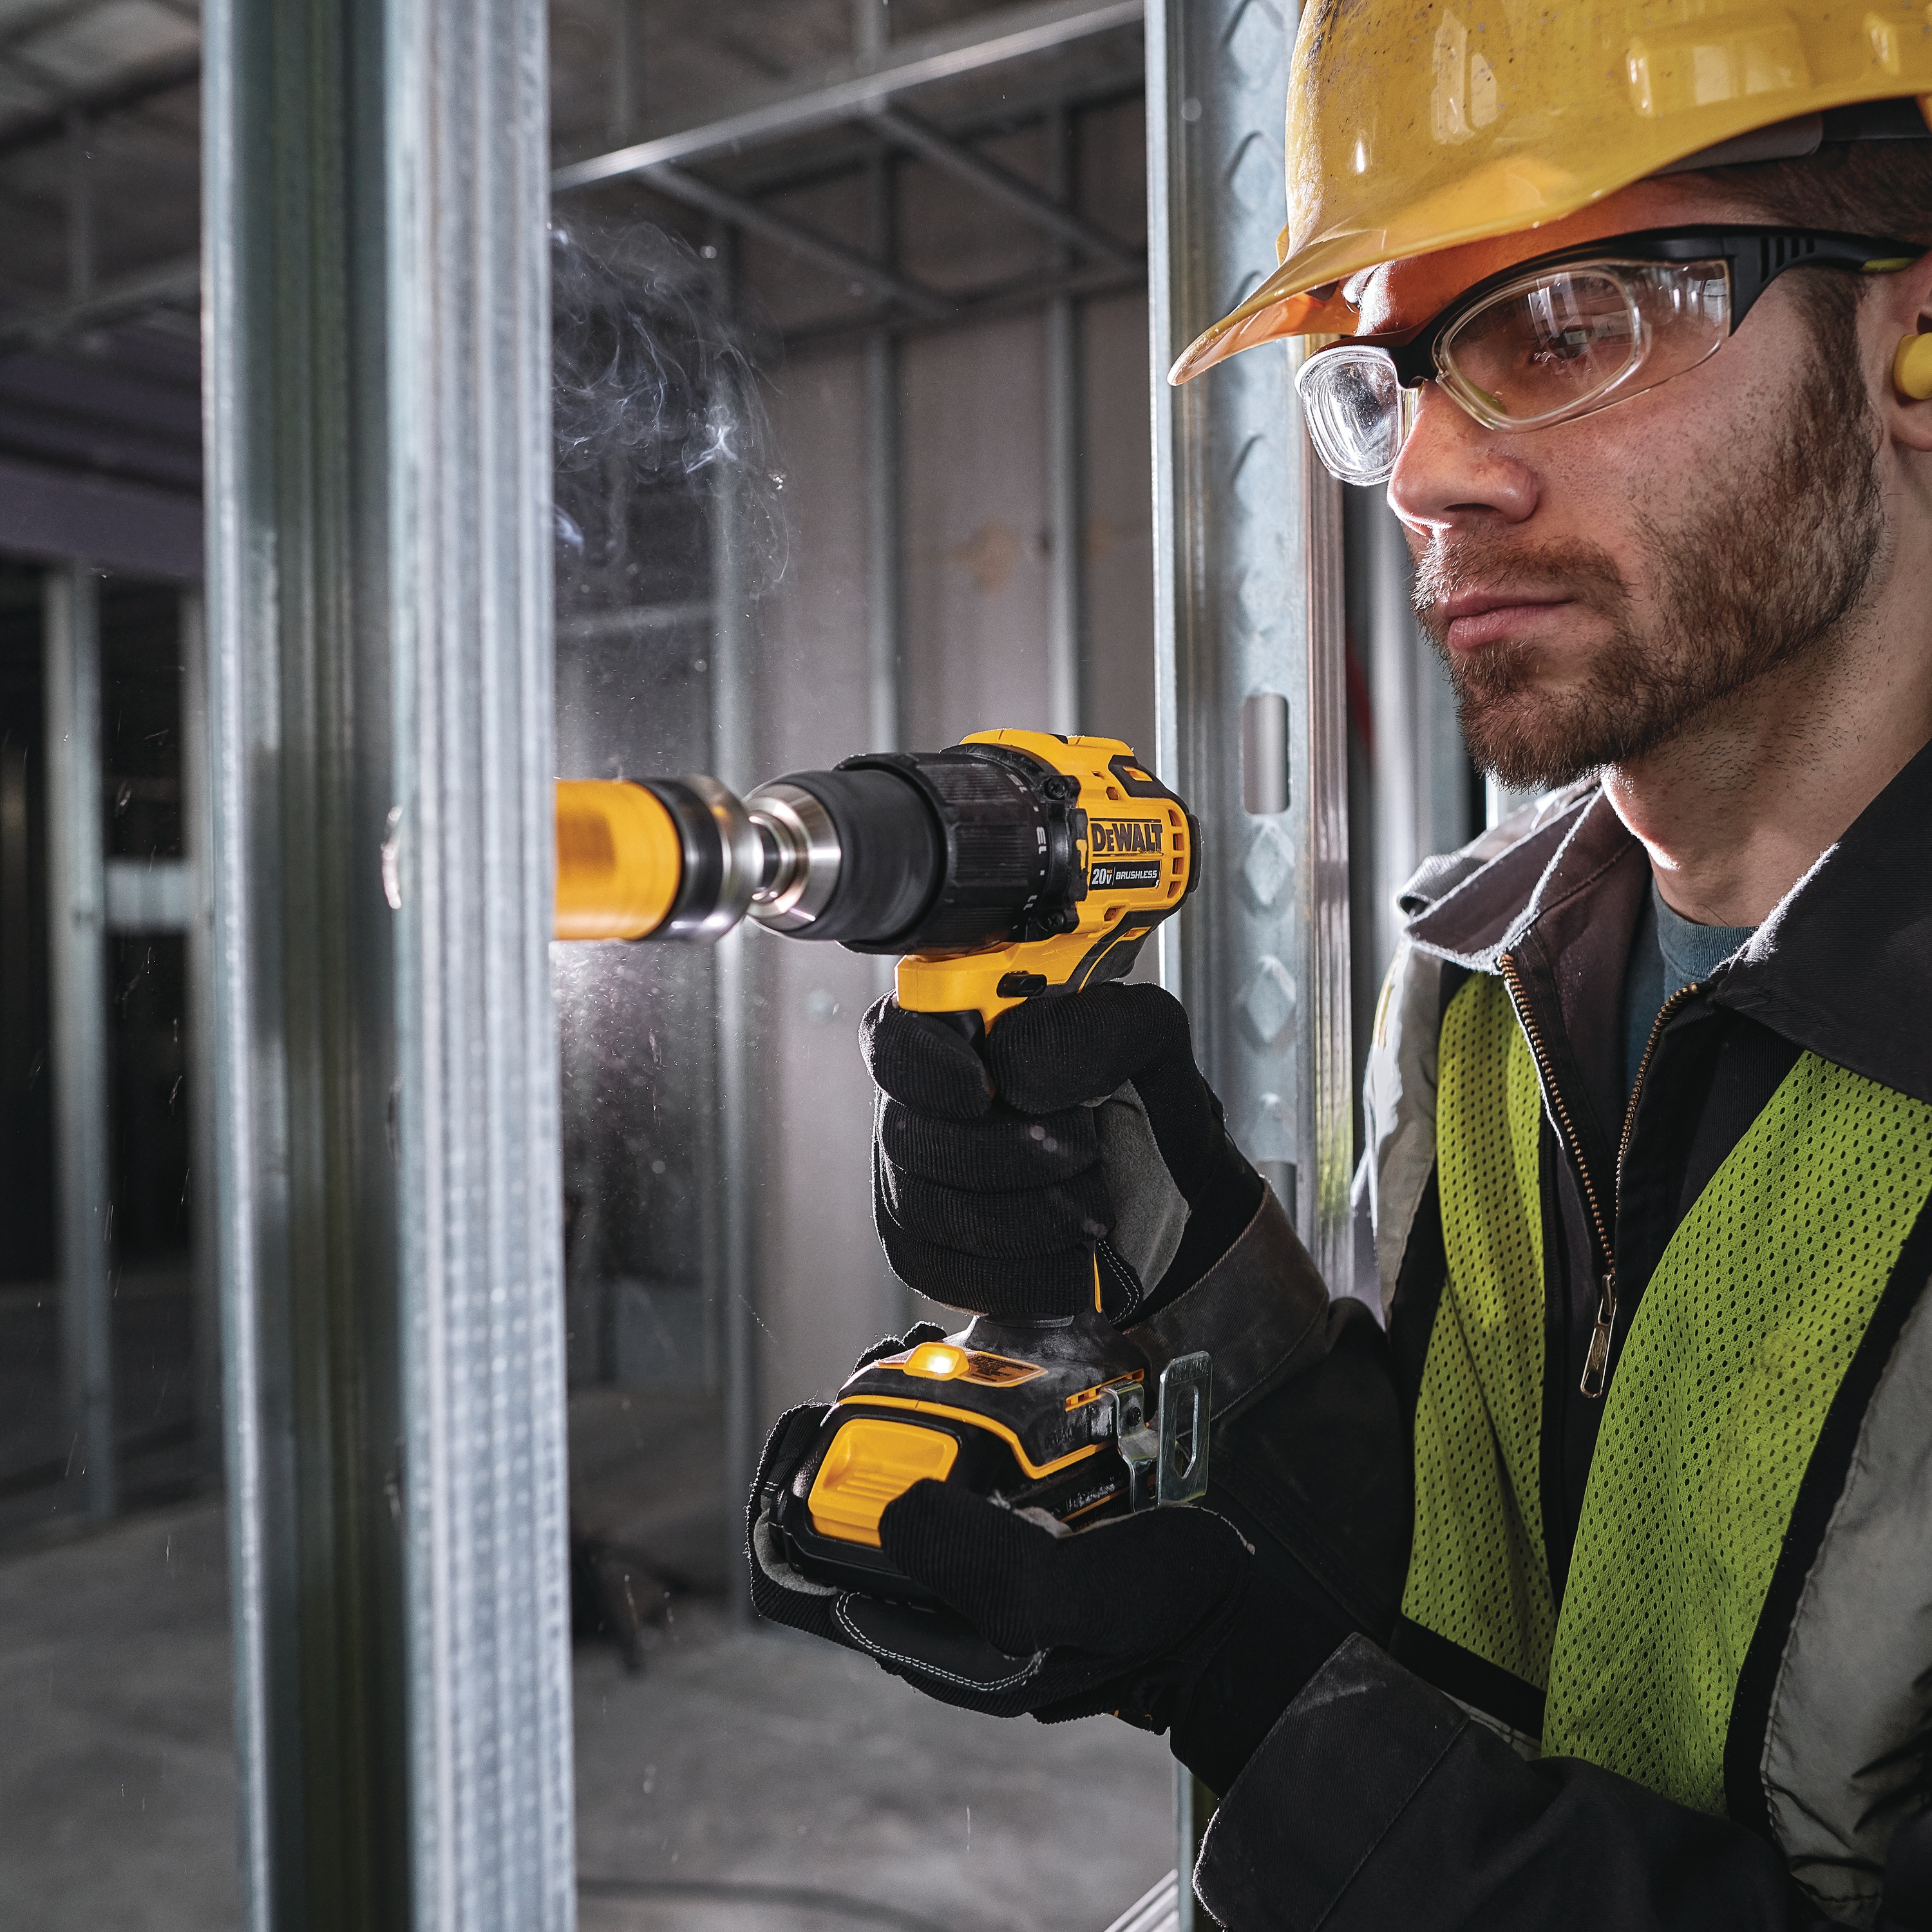 ATOMIC Brushless Compact Cordless half inch Hammer drill driver  being used by a person.